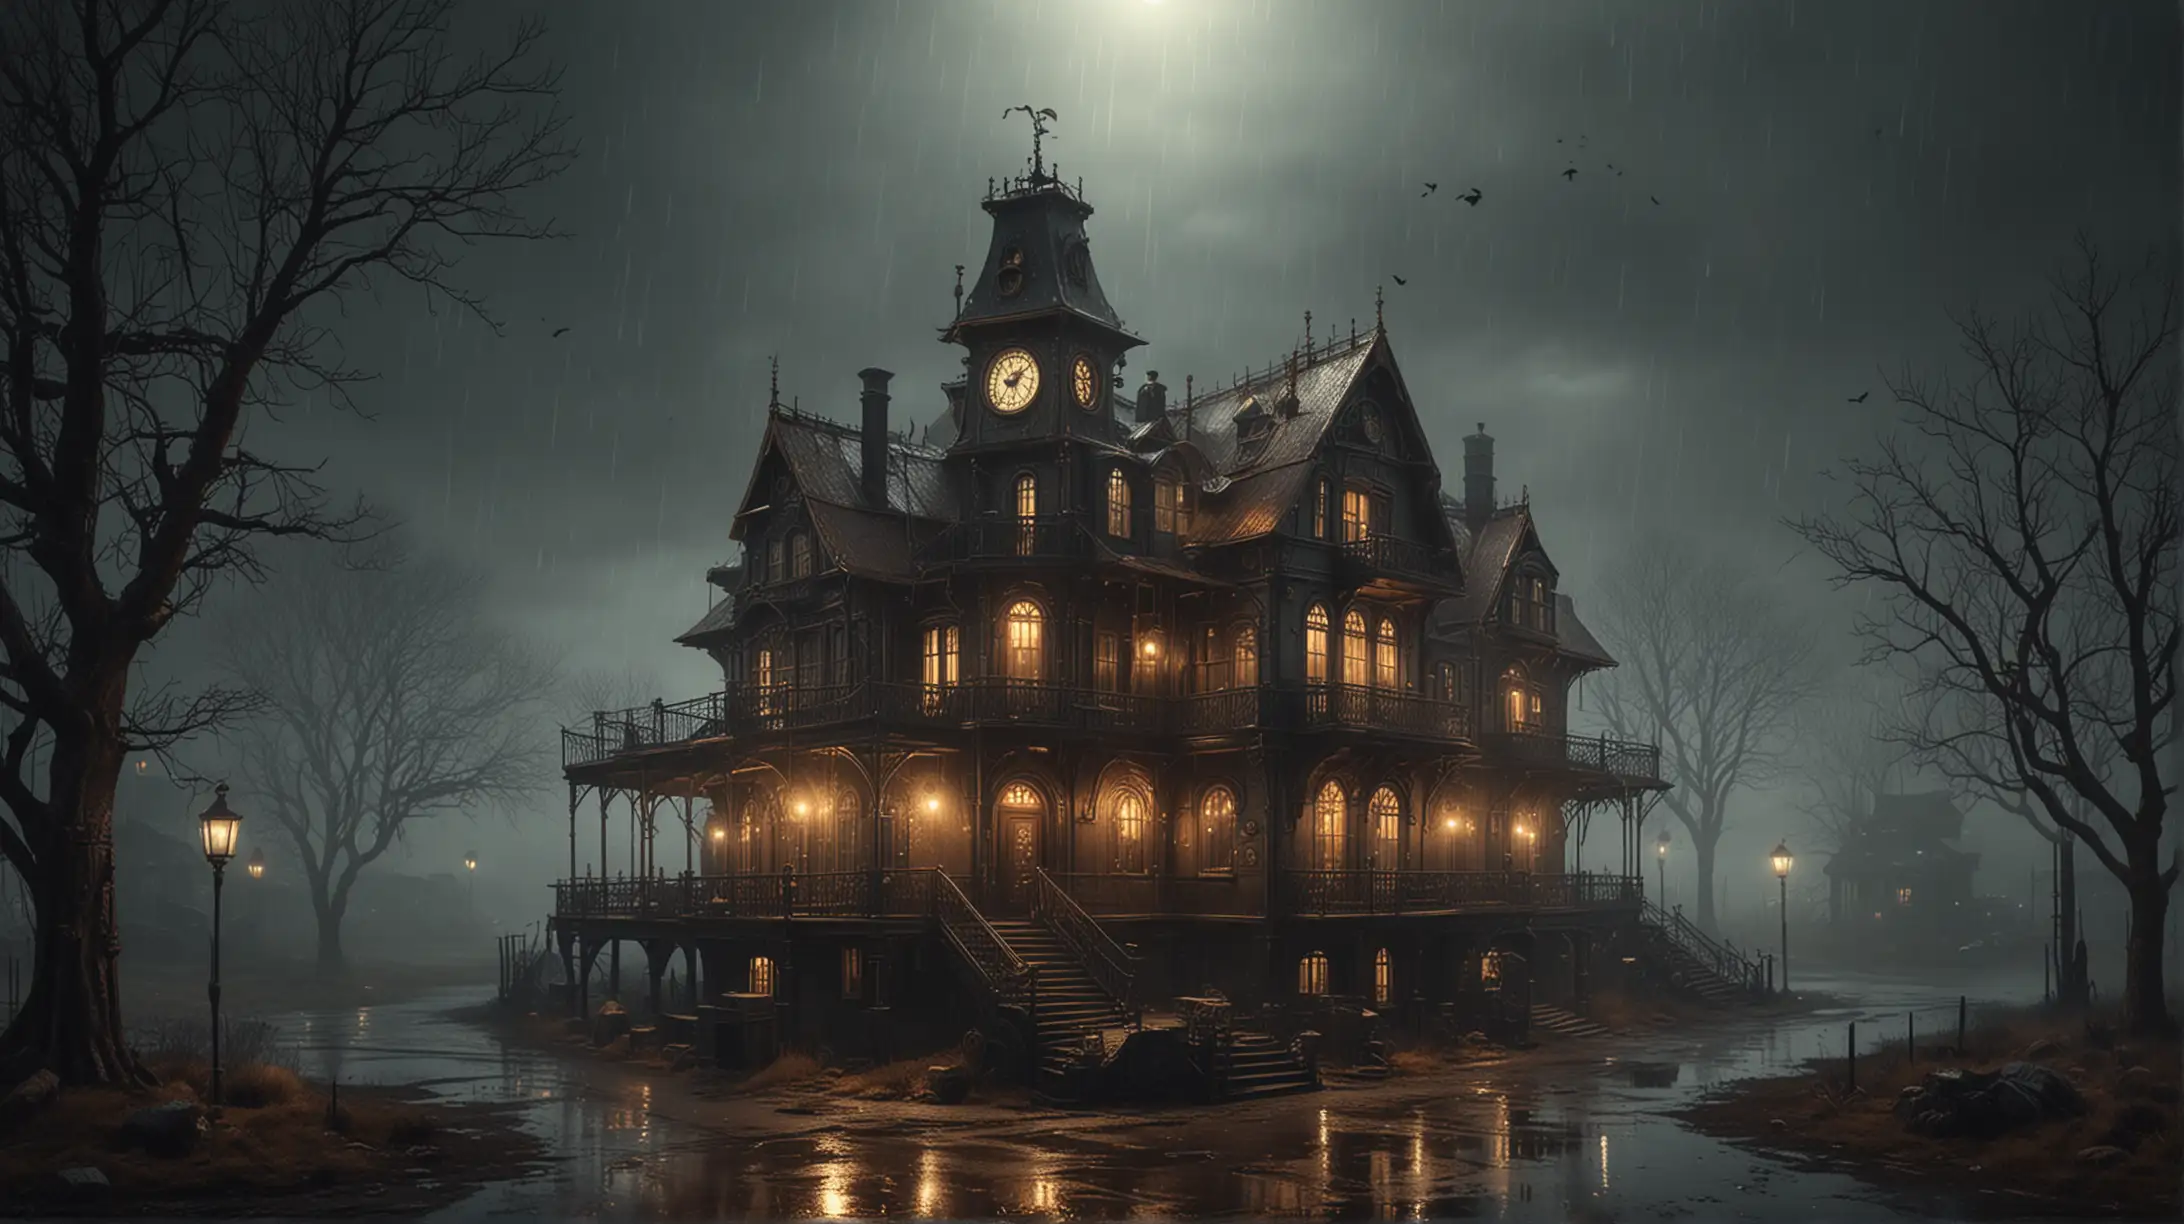 an old steampunk manor house in the wasteland, copper, wood, gold, dark night, all lights in the house are on,  rain and heavy fog, bird's eye distant view